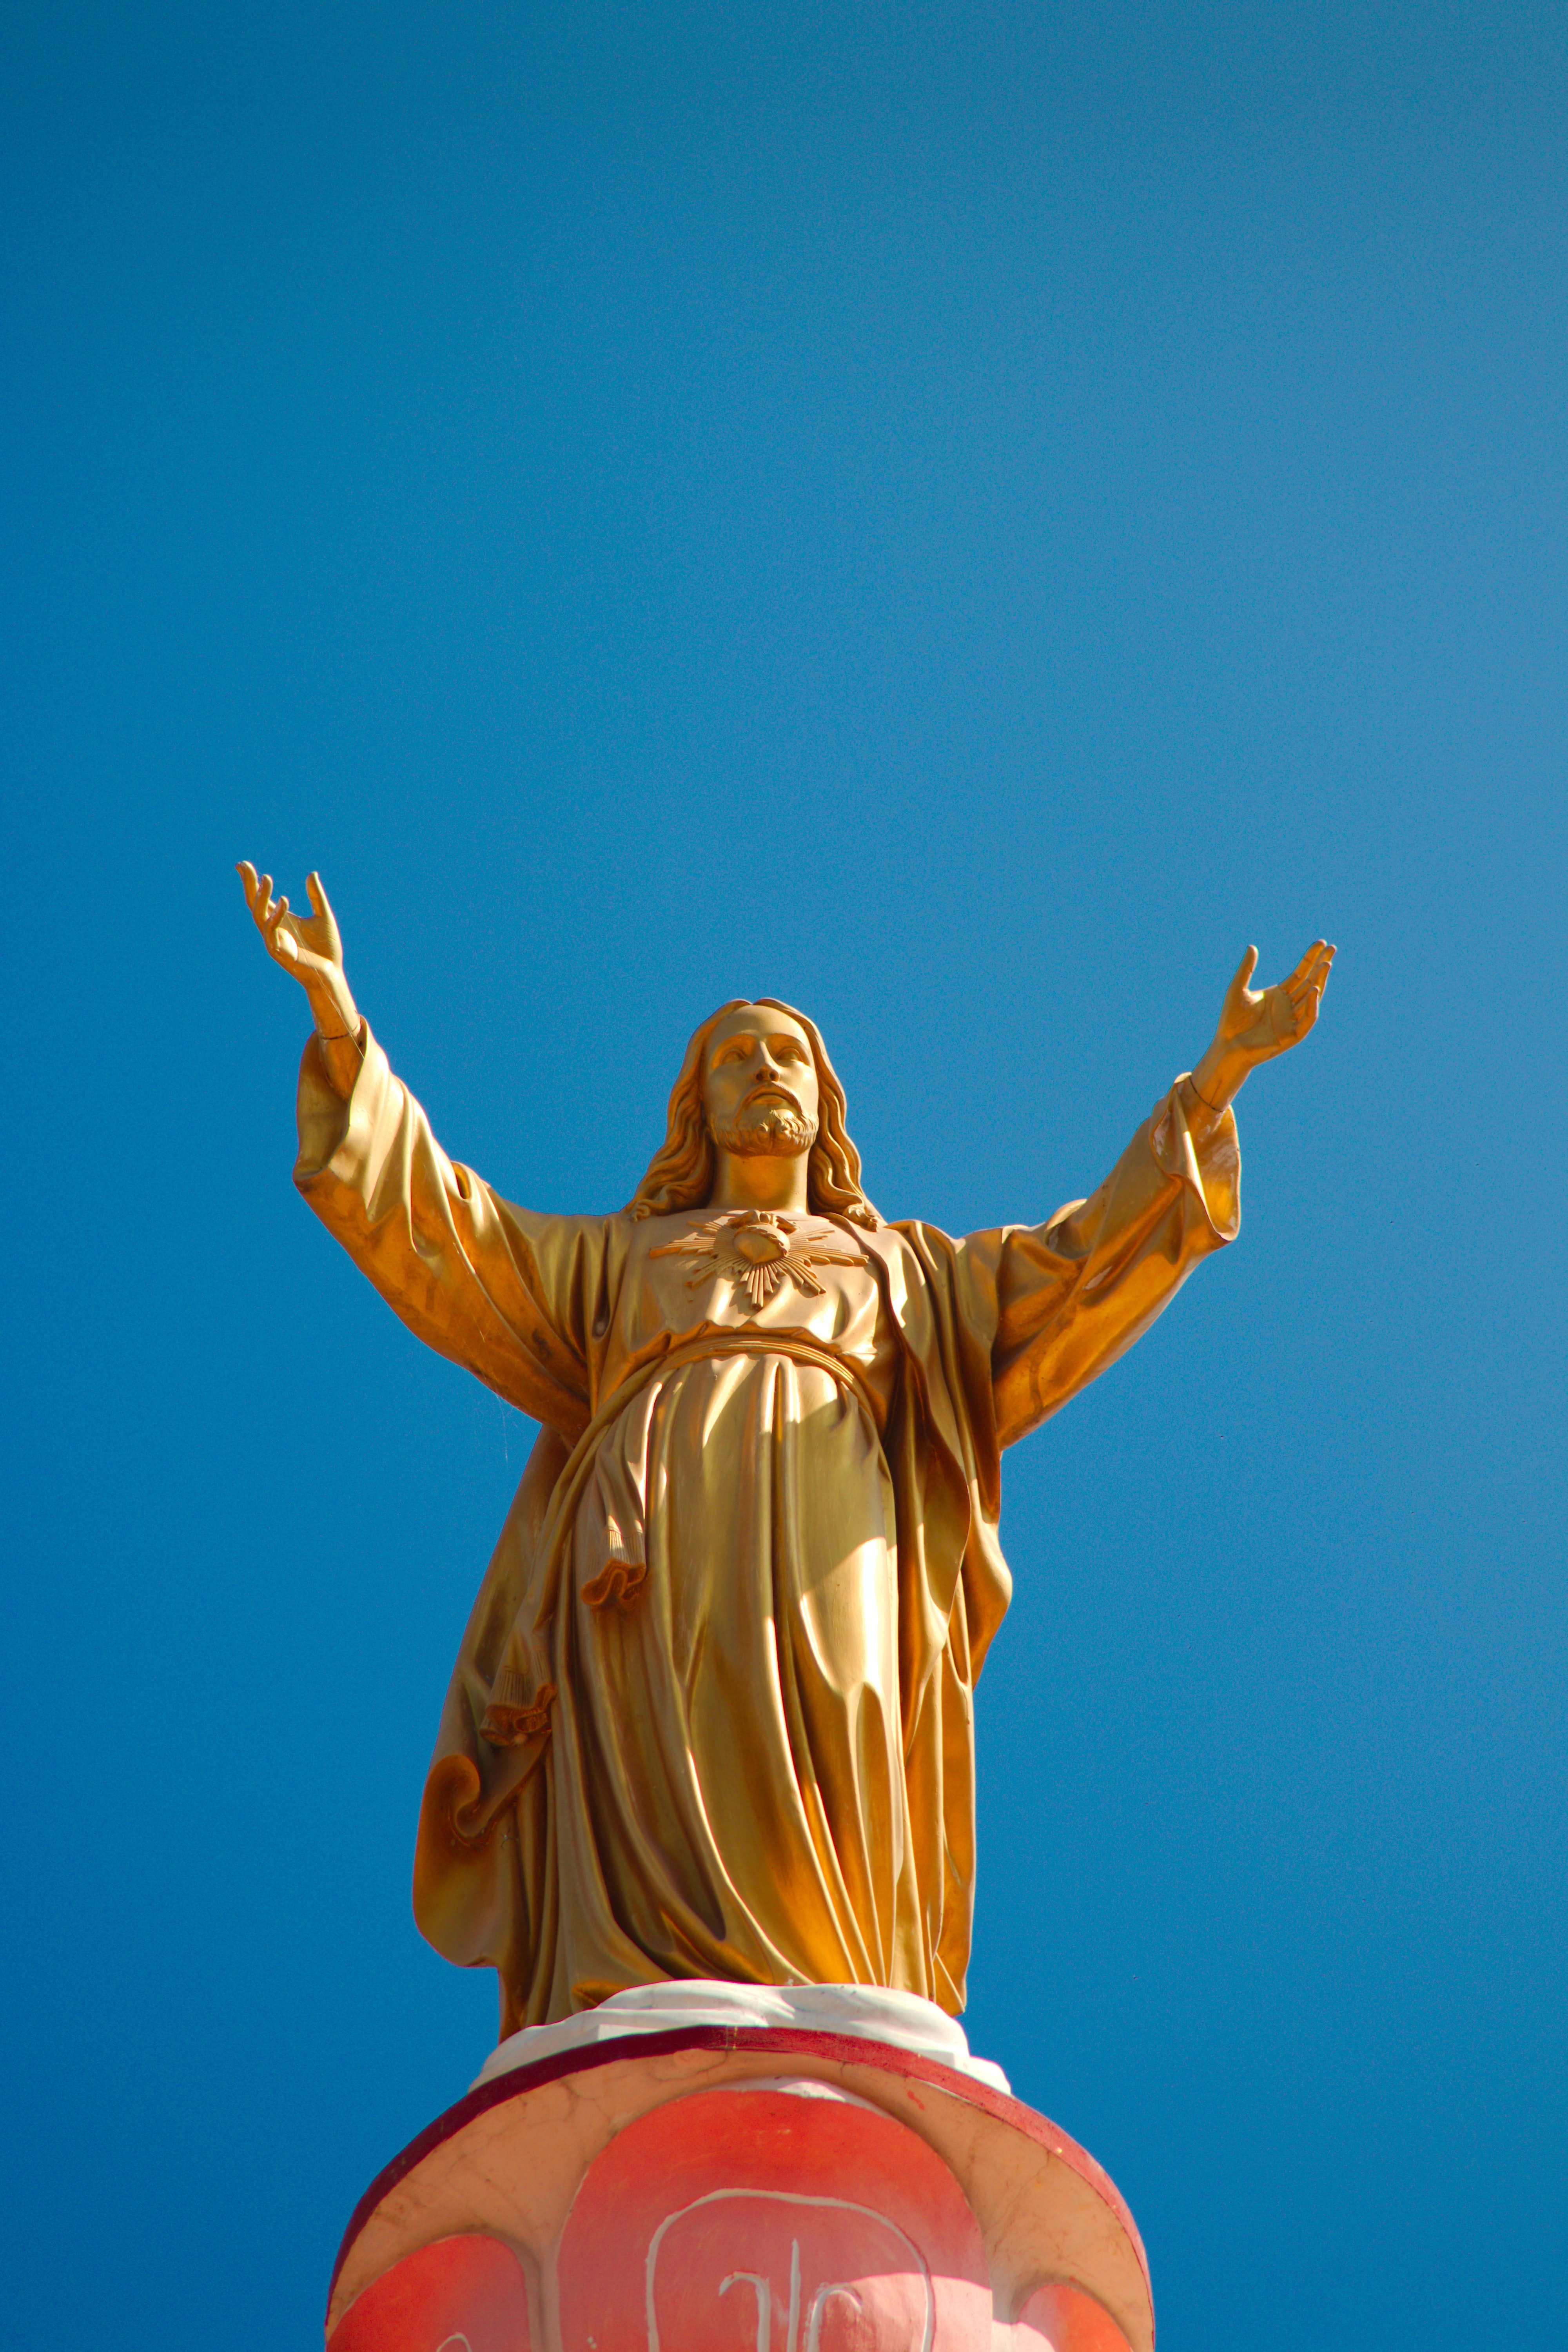 A golden statue of Jesus with his arms outstretched. - Jesus